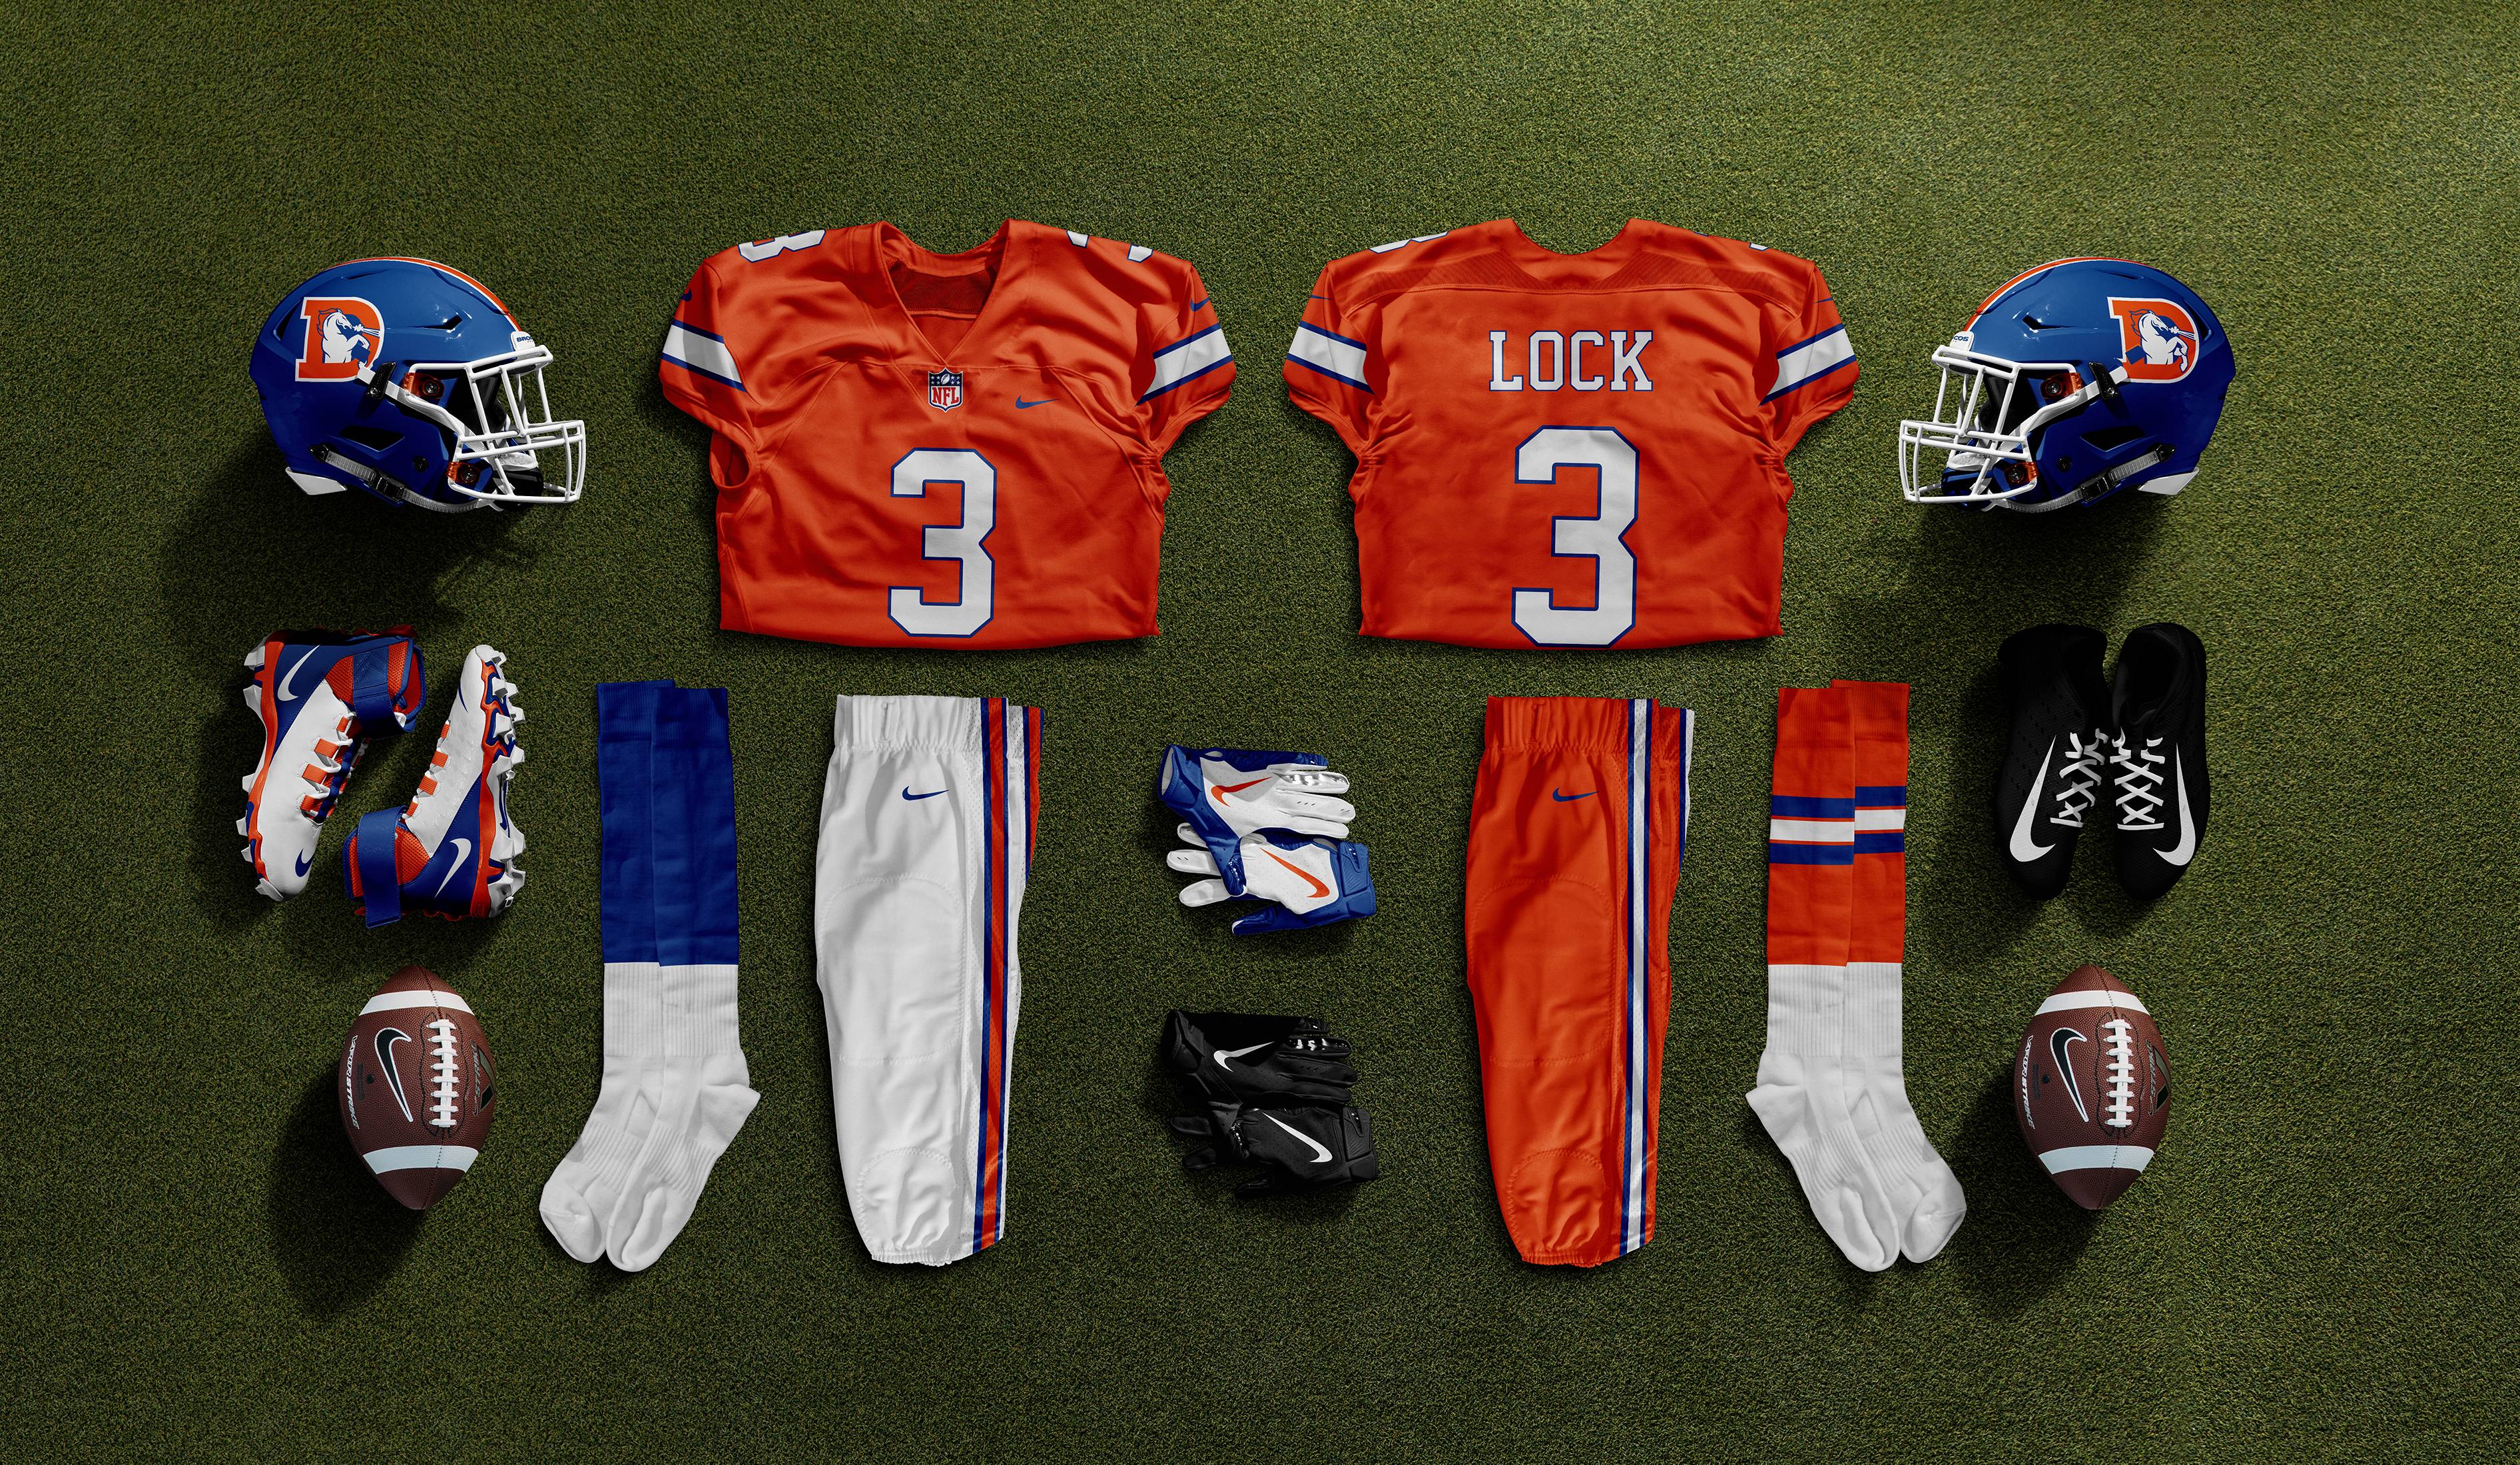 broncos uniforms through the years